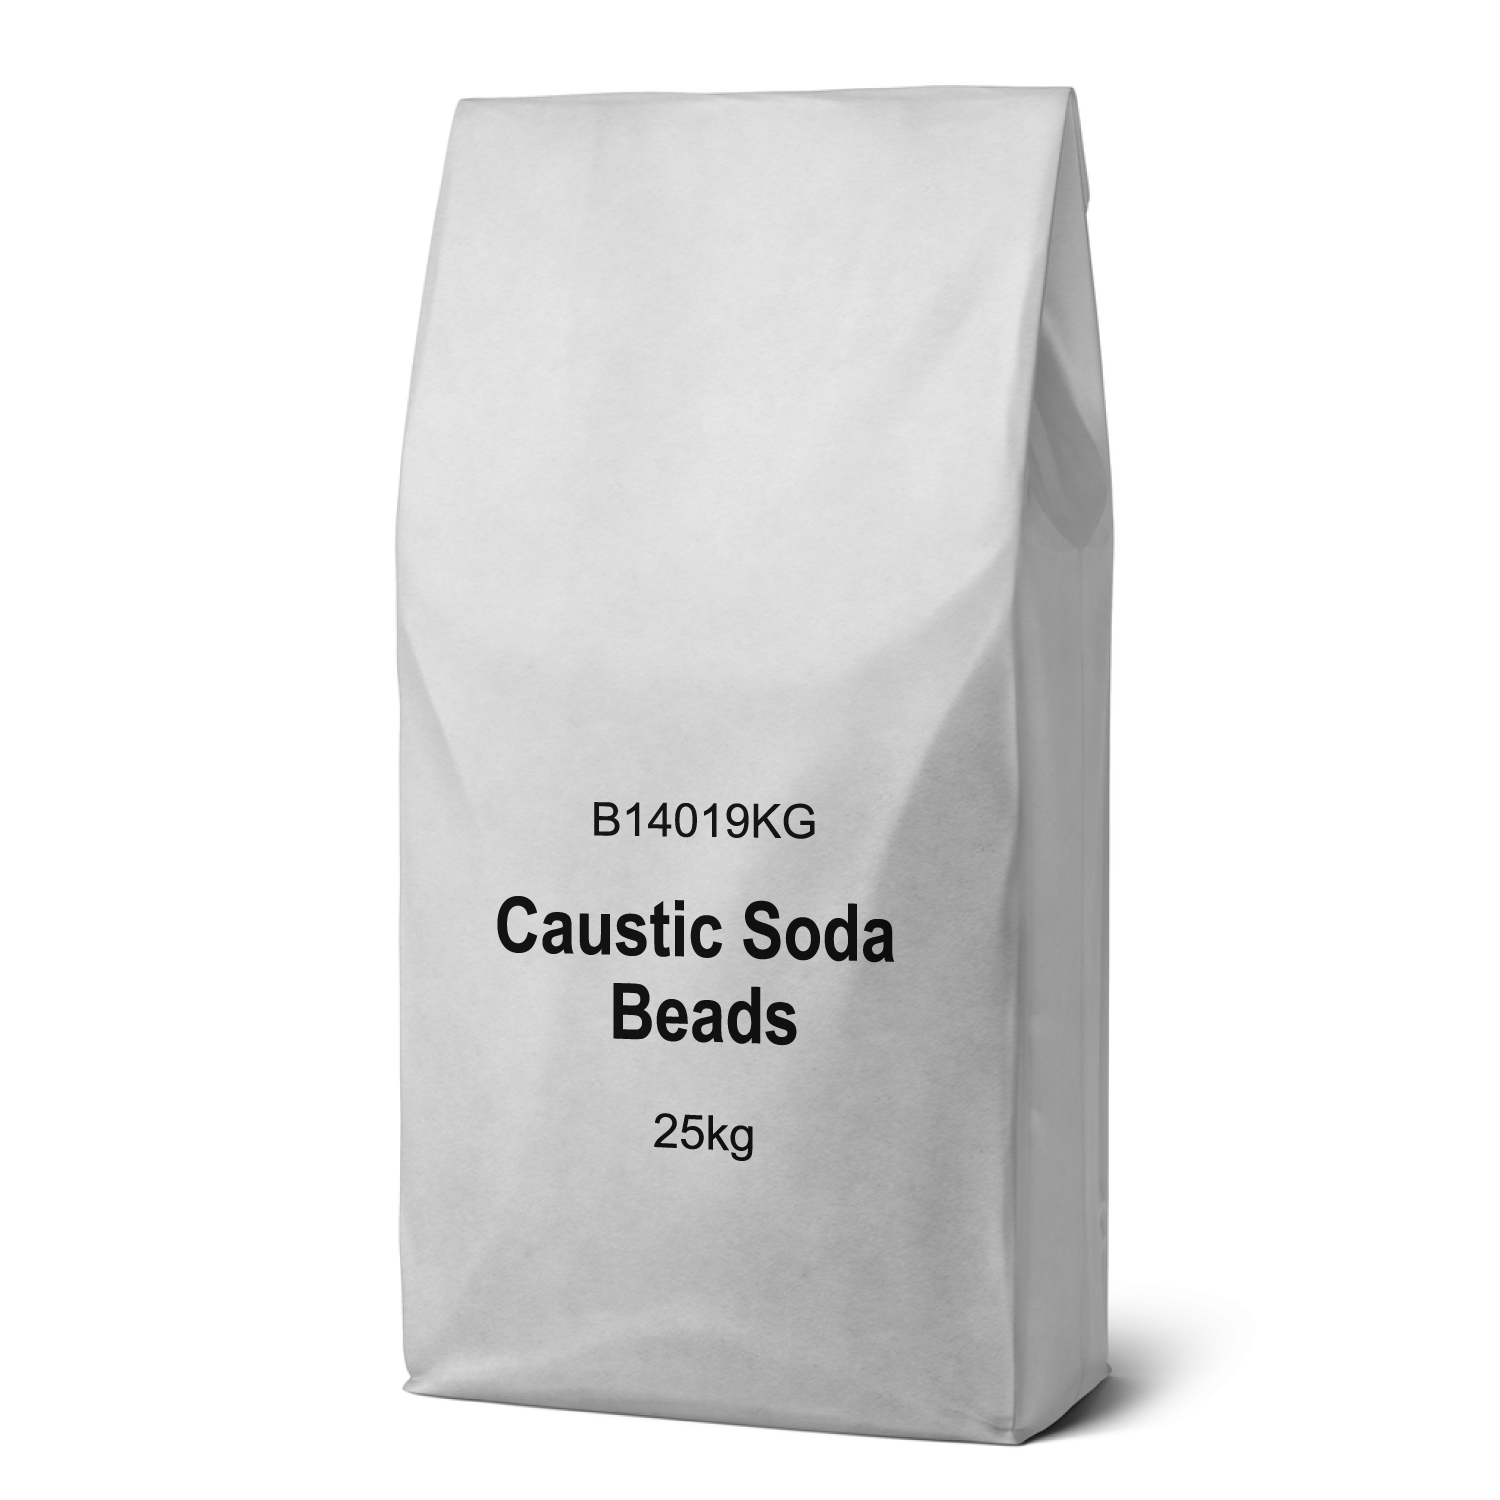 Product image for Caustic Soda Beads